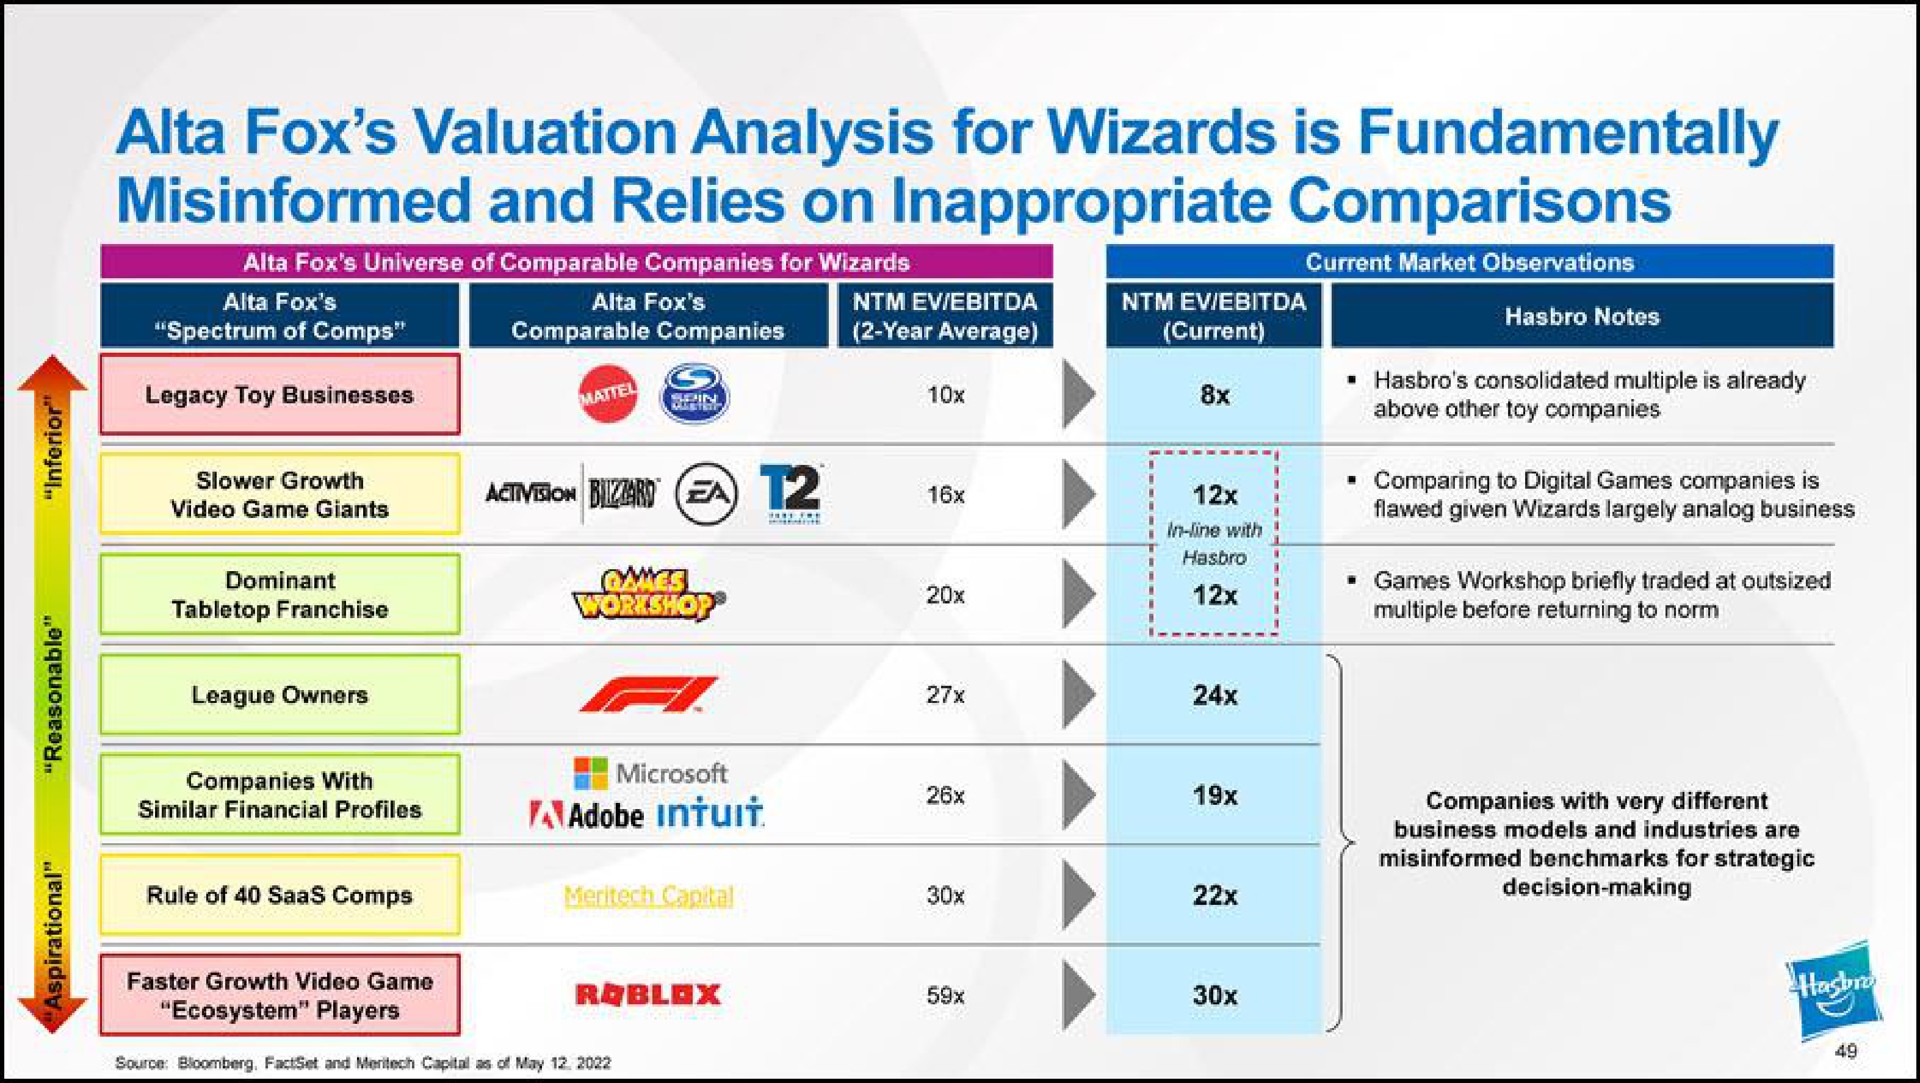 fox valuation analysis for wizards is fundamentally misinformed and relies on inappropriate comparisons adobe intuit | Hasbro